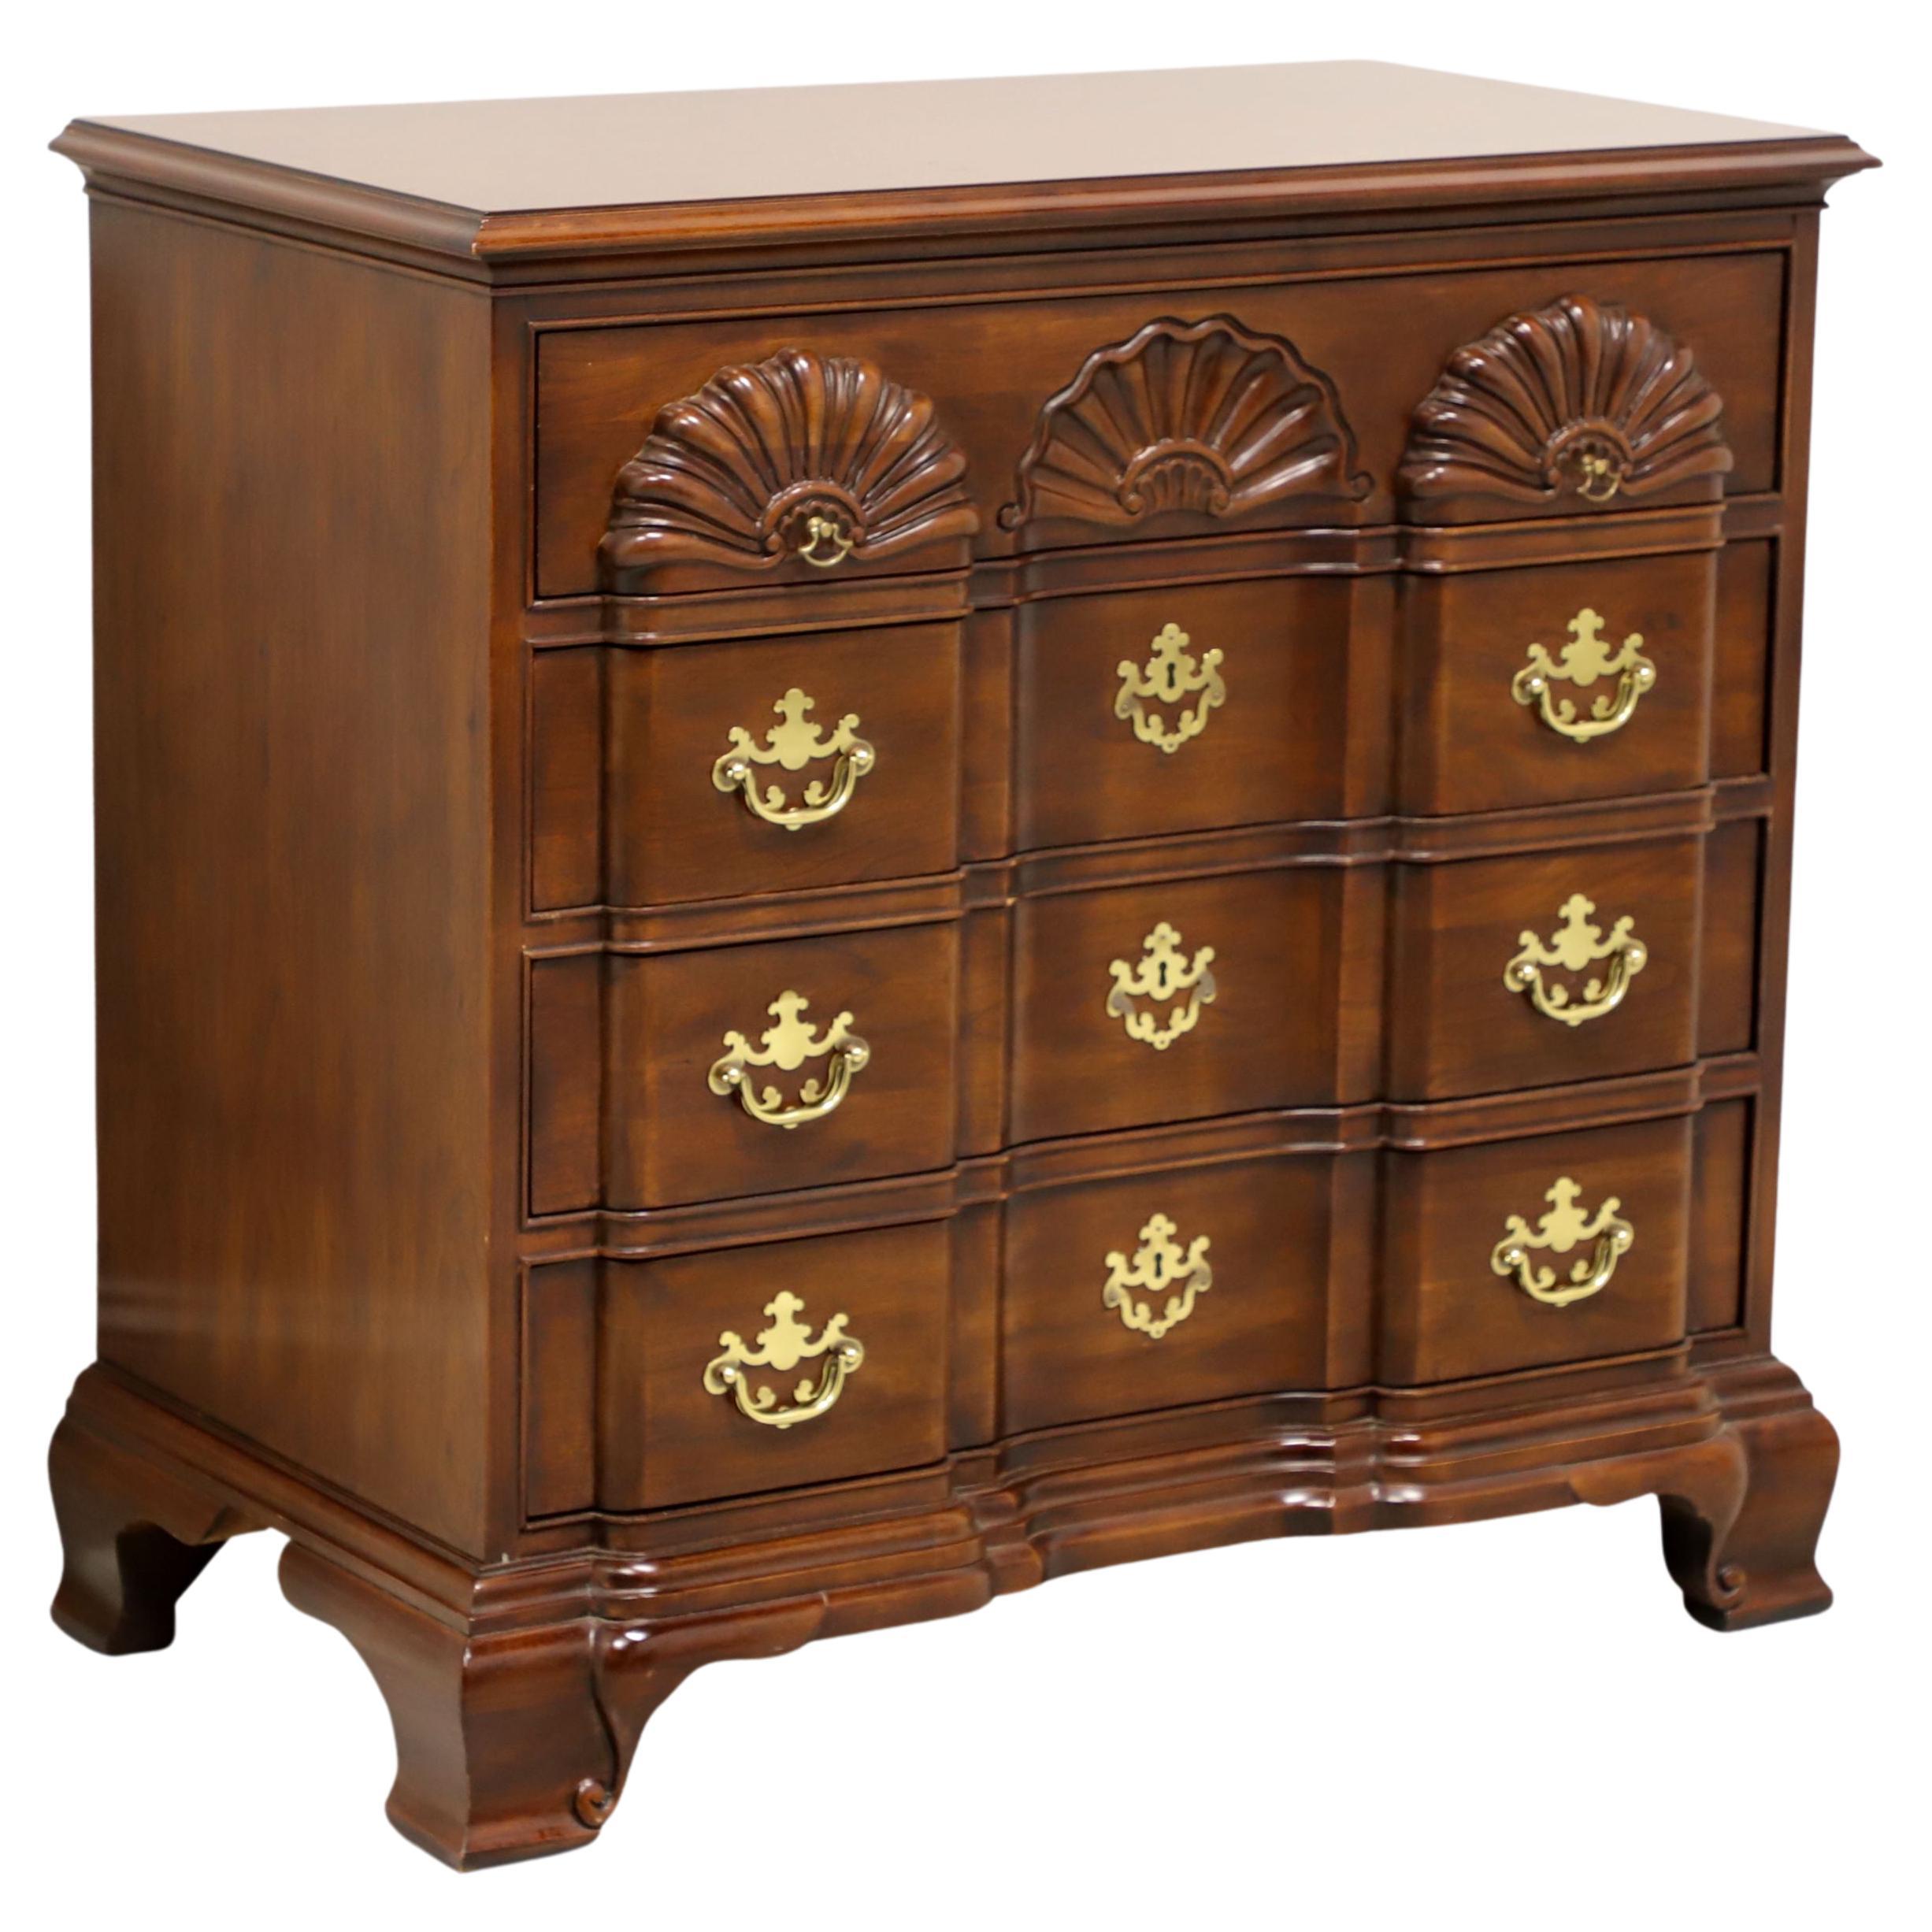 DREXEL Chippendale Cherry Block Front Bachelor Chest